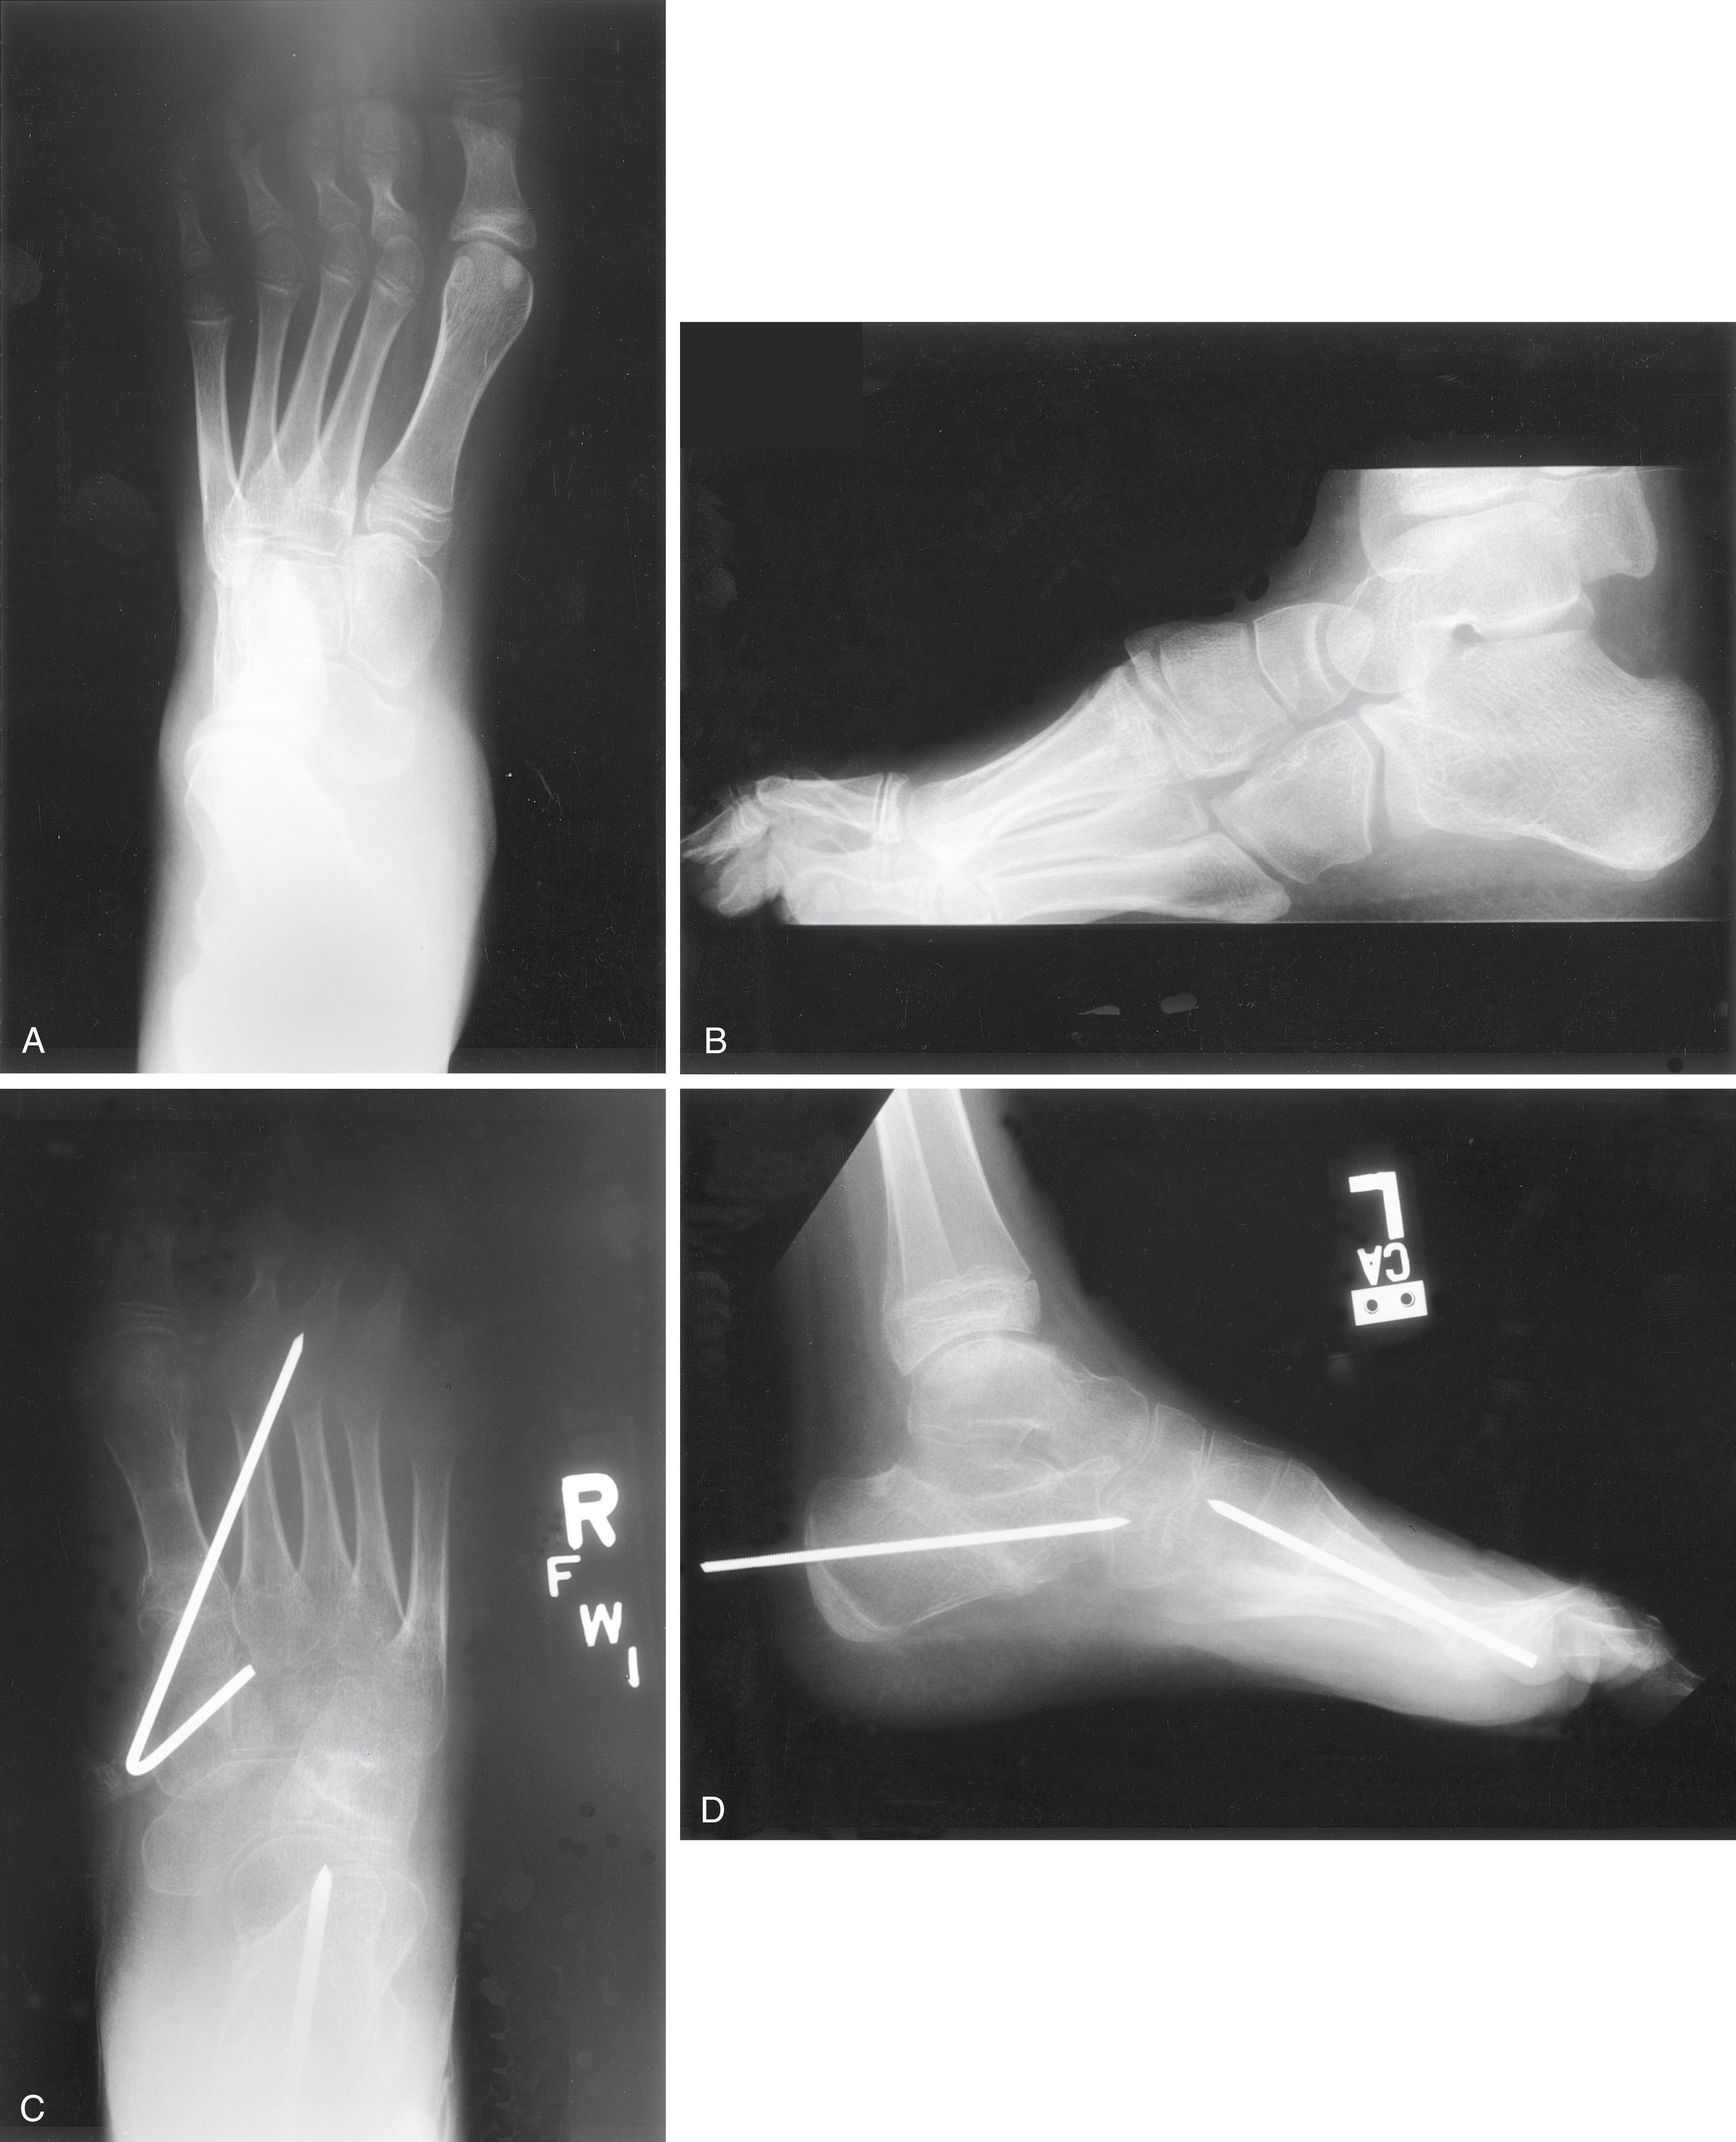 FIG. 34.7, (A and B) Radiographs of an 11-year-old child with cavovarus feet secondary to Charcot-Marie-Tooth disease. The hindfoot varus was inflexible. (C and D) Postoperative radiographic appearance. Surgery consisted of a calcaneal osteotomy, first metatarsal osteotomy, plantar fascia release, and peroneus longus to peroneus brevis transfer.